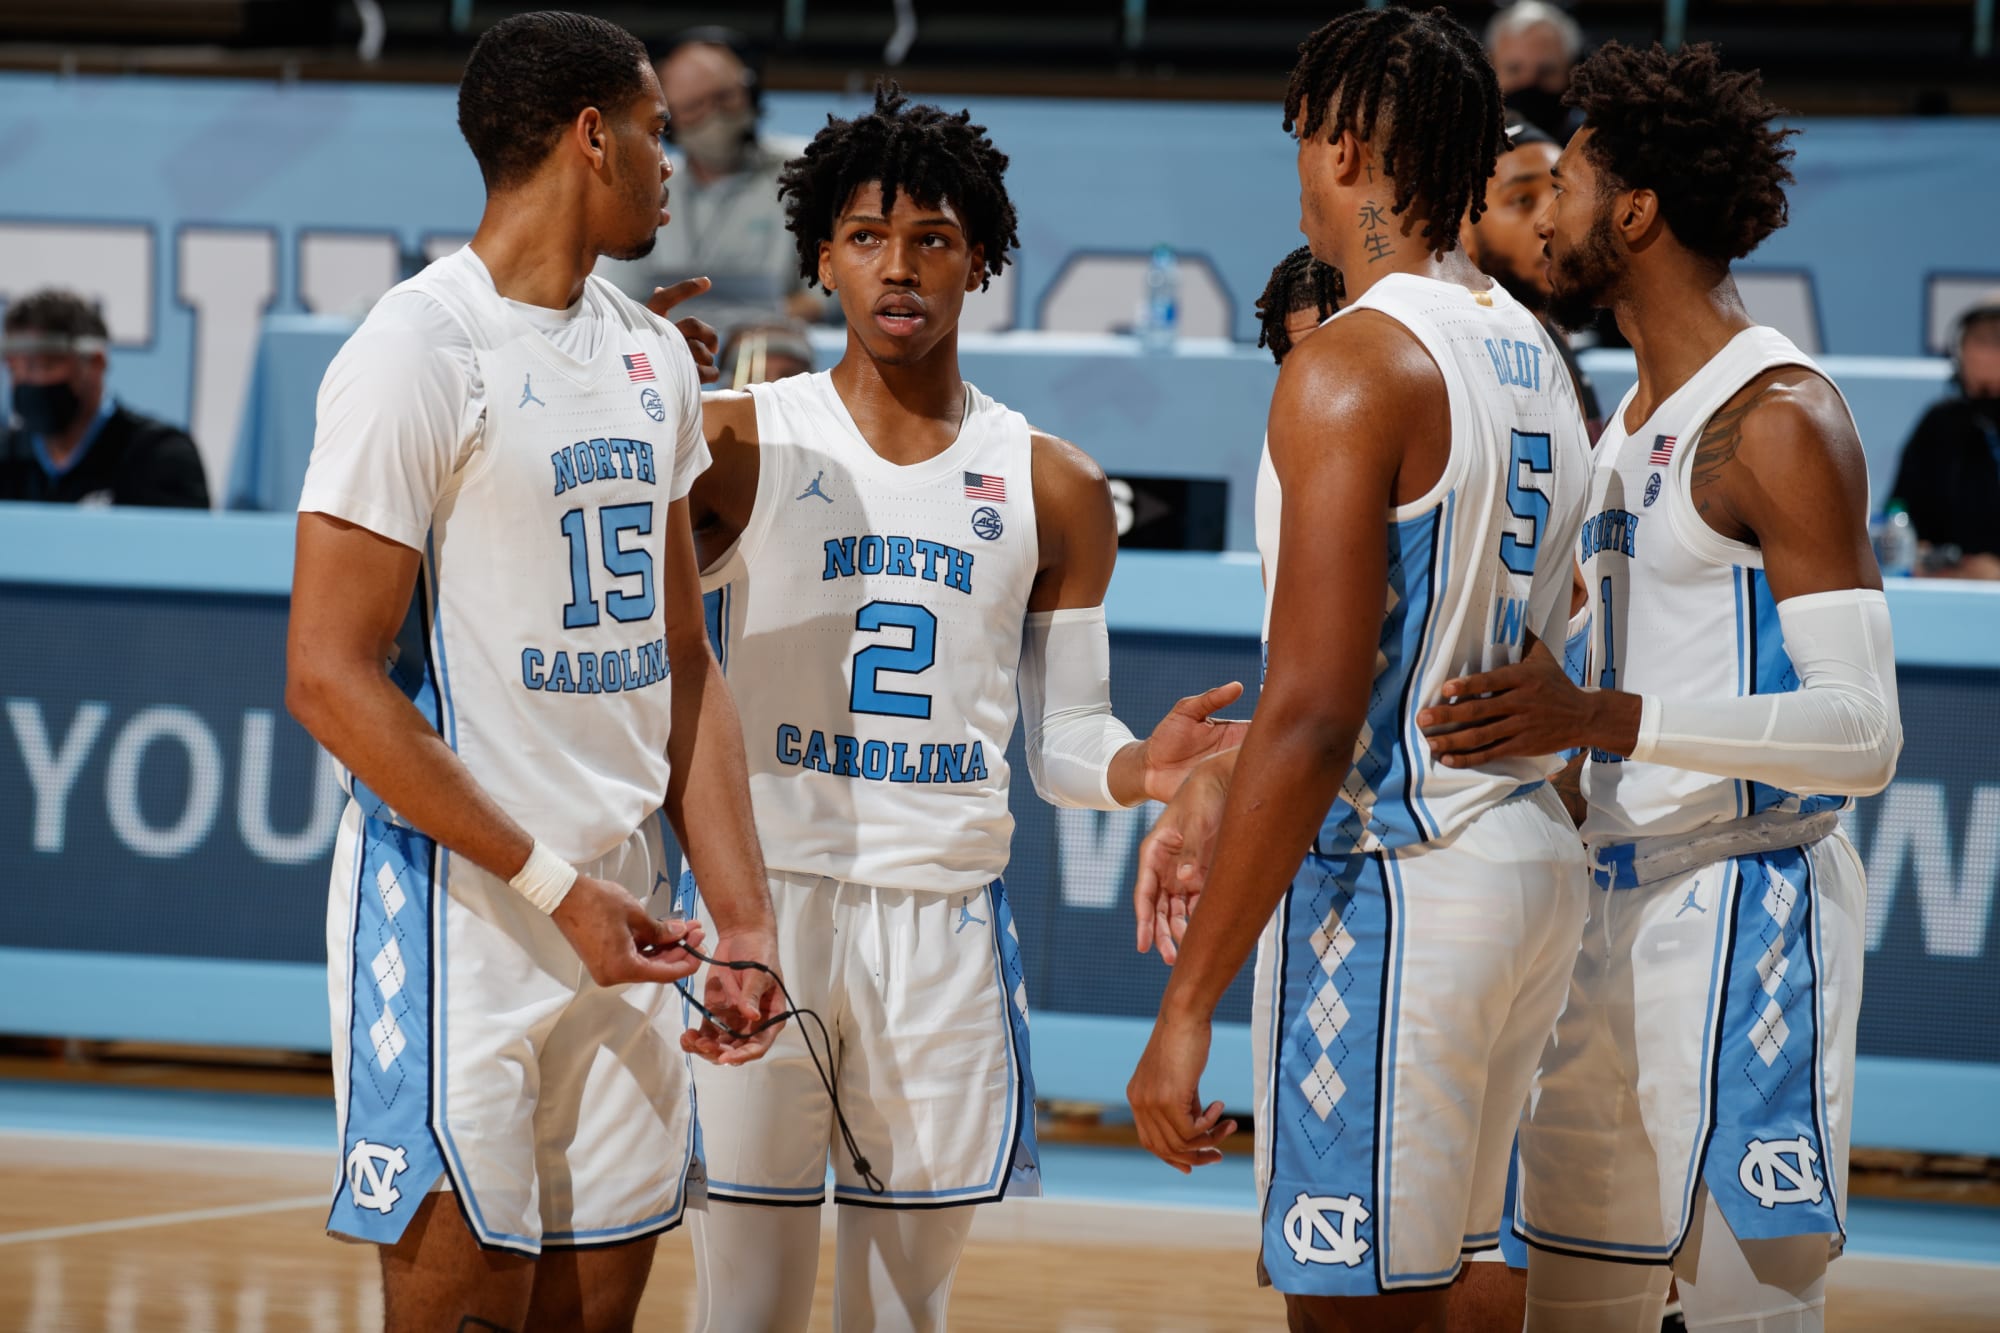 UNC Basketball: Tar Heels' projected 2021-22 starting lineup - Page 2